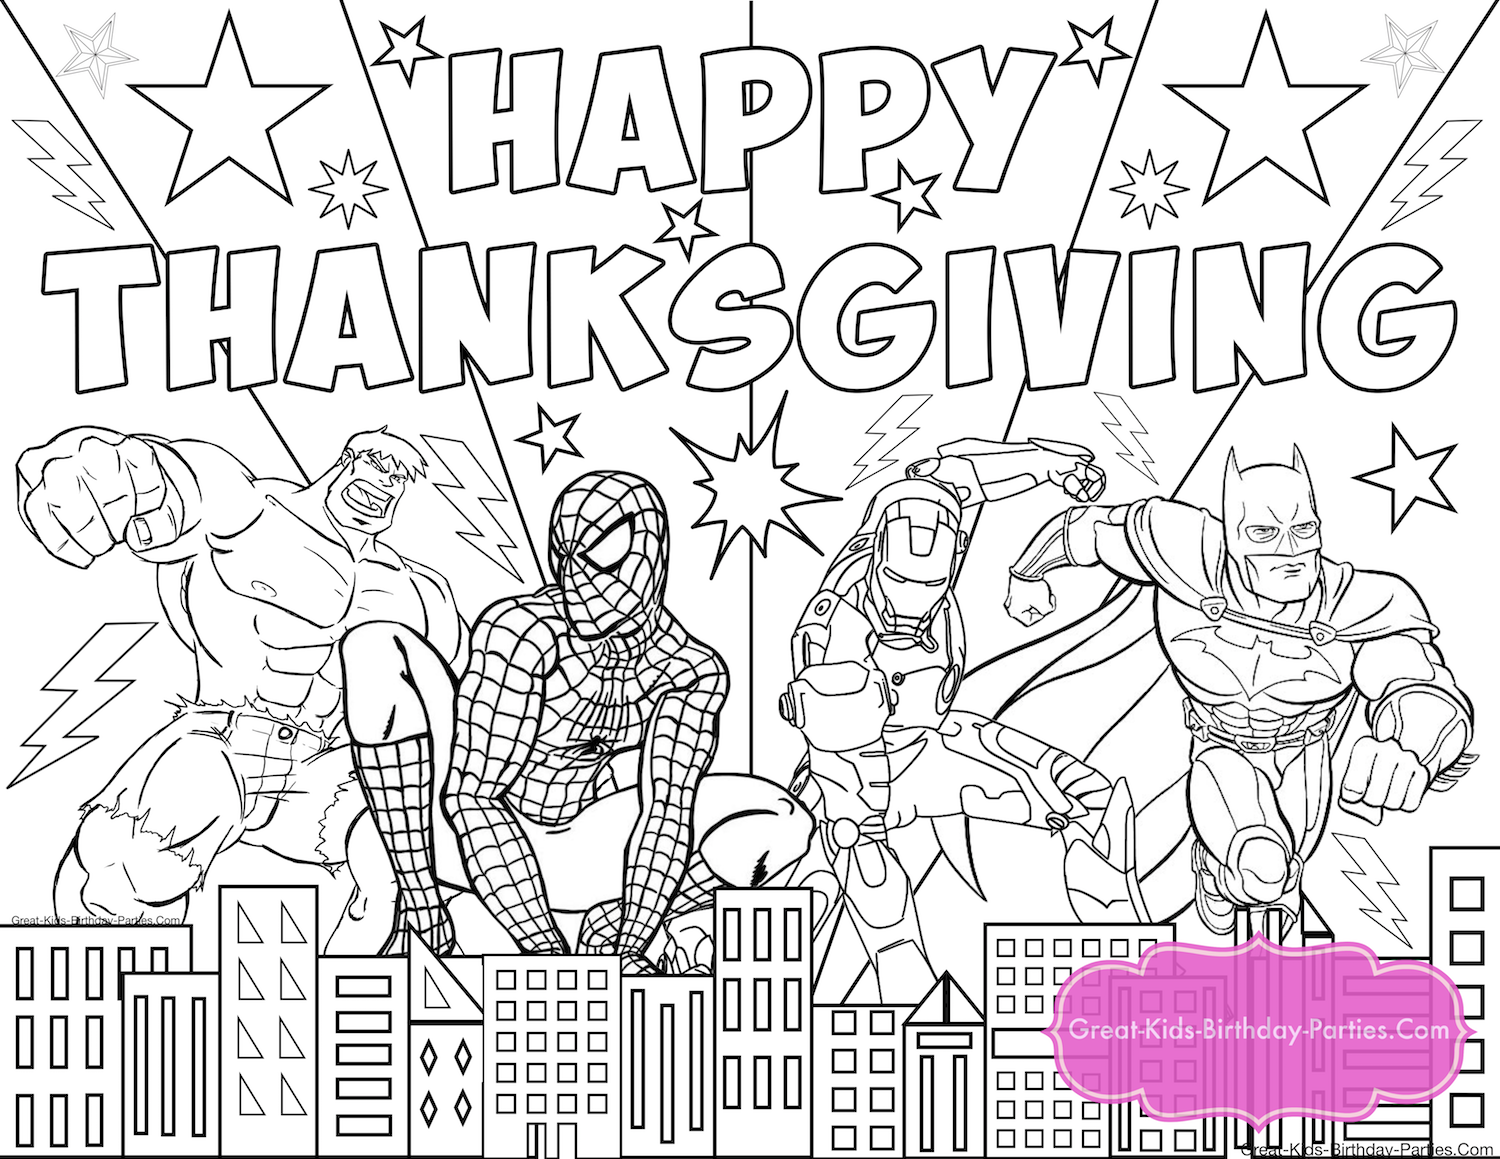 Superhero Thanksgiving coloring pages for kids